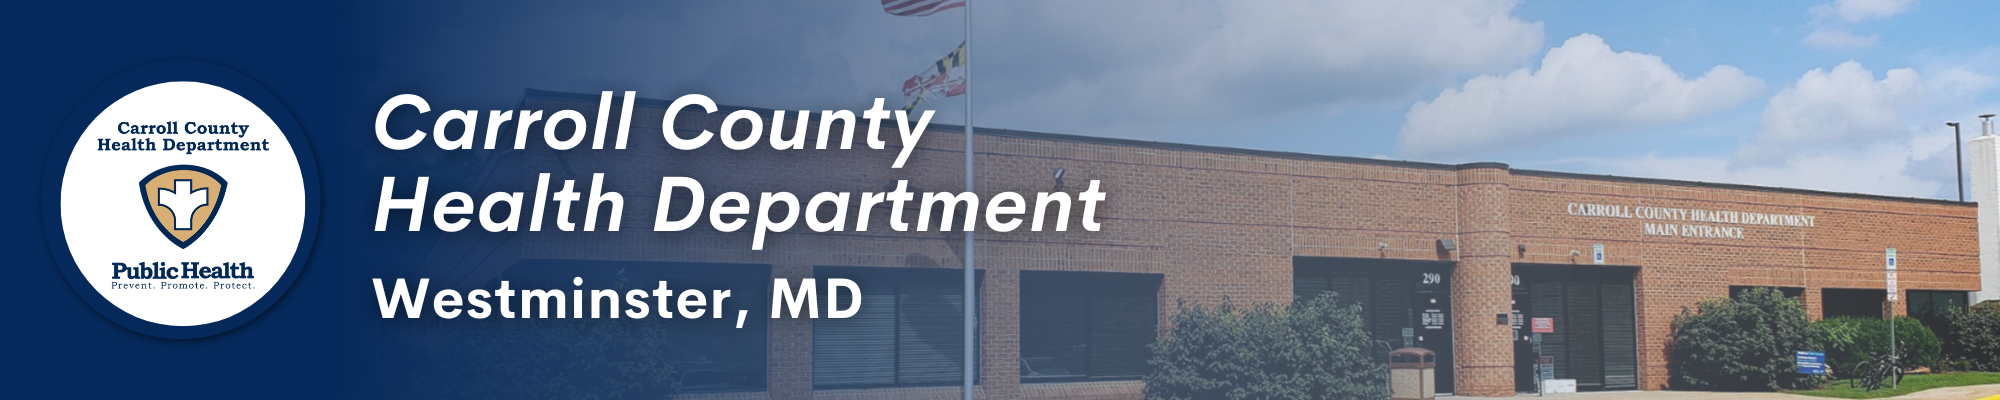 Banner image of the outside of the Carroll County Health Department building